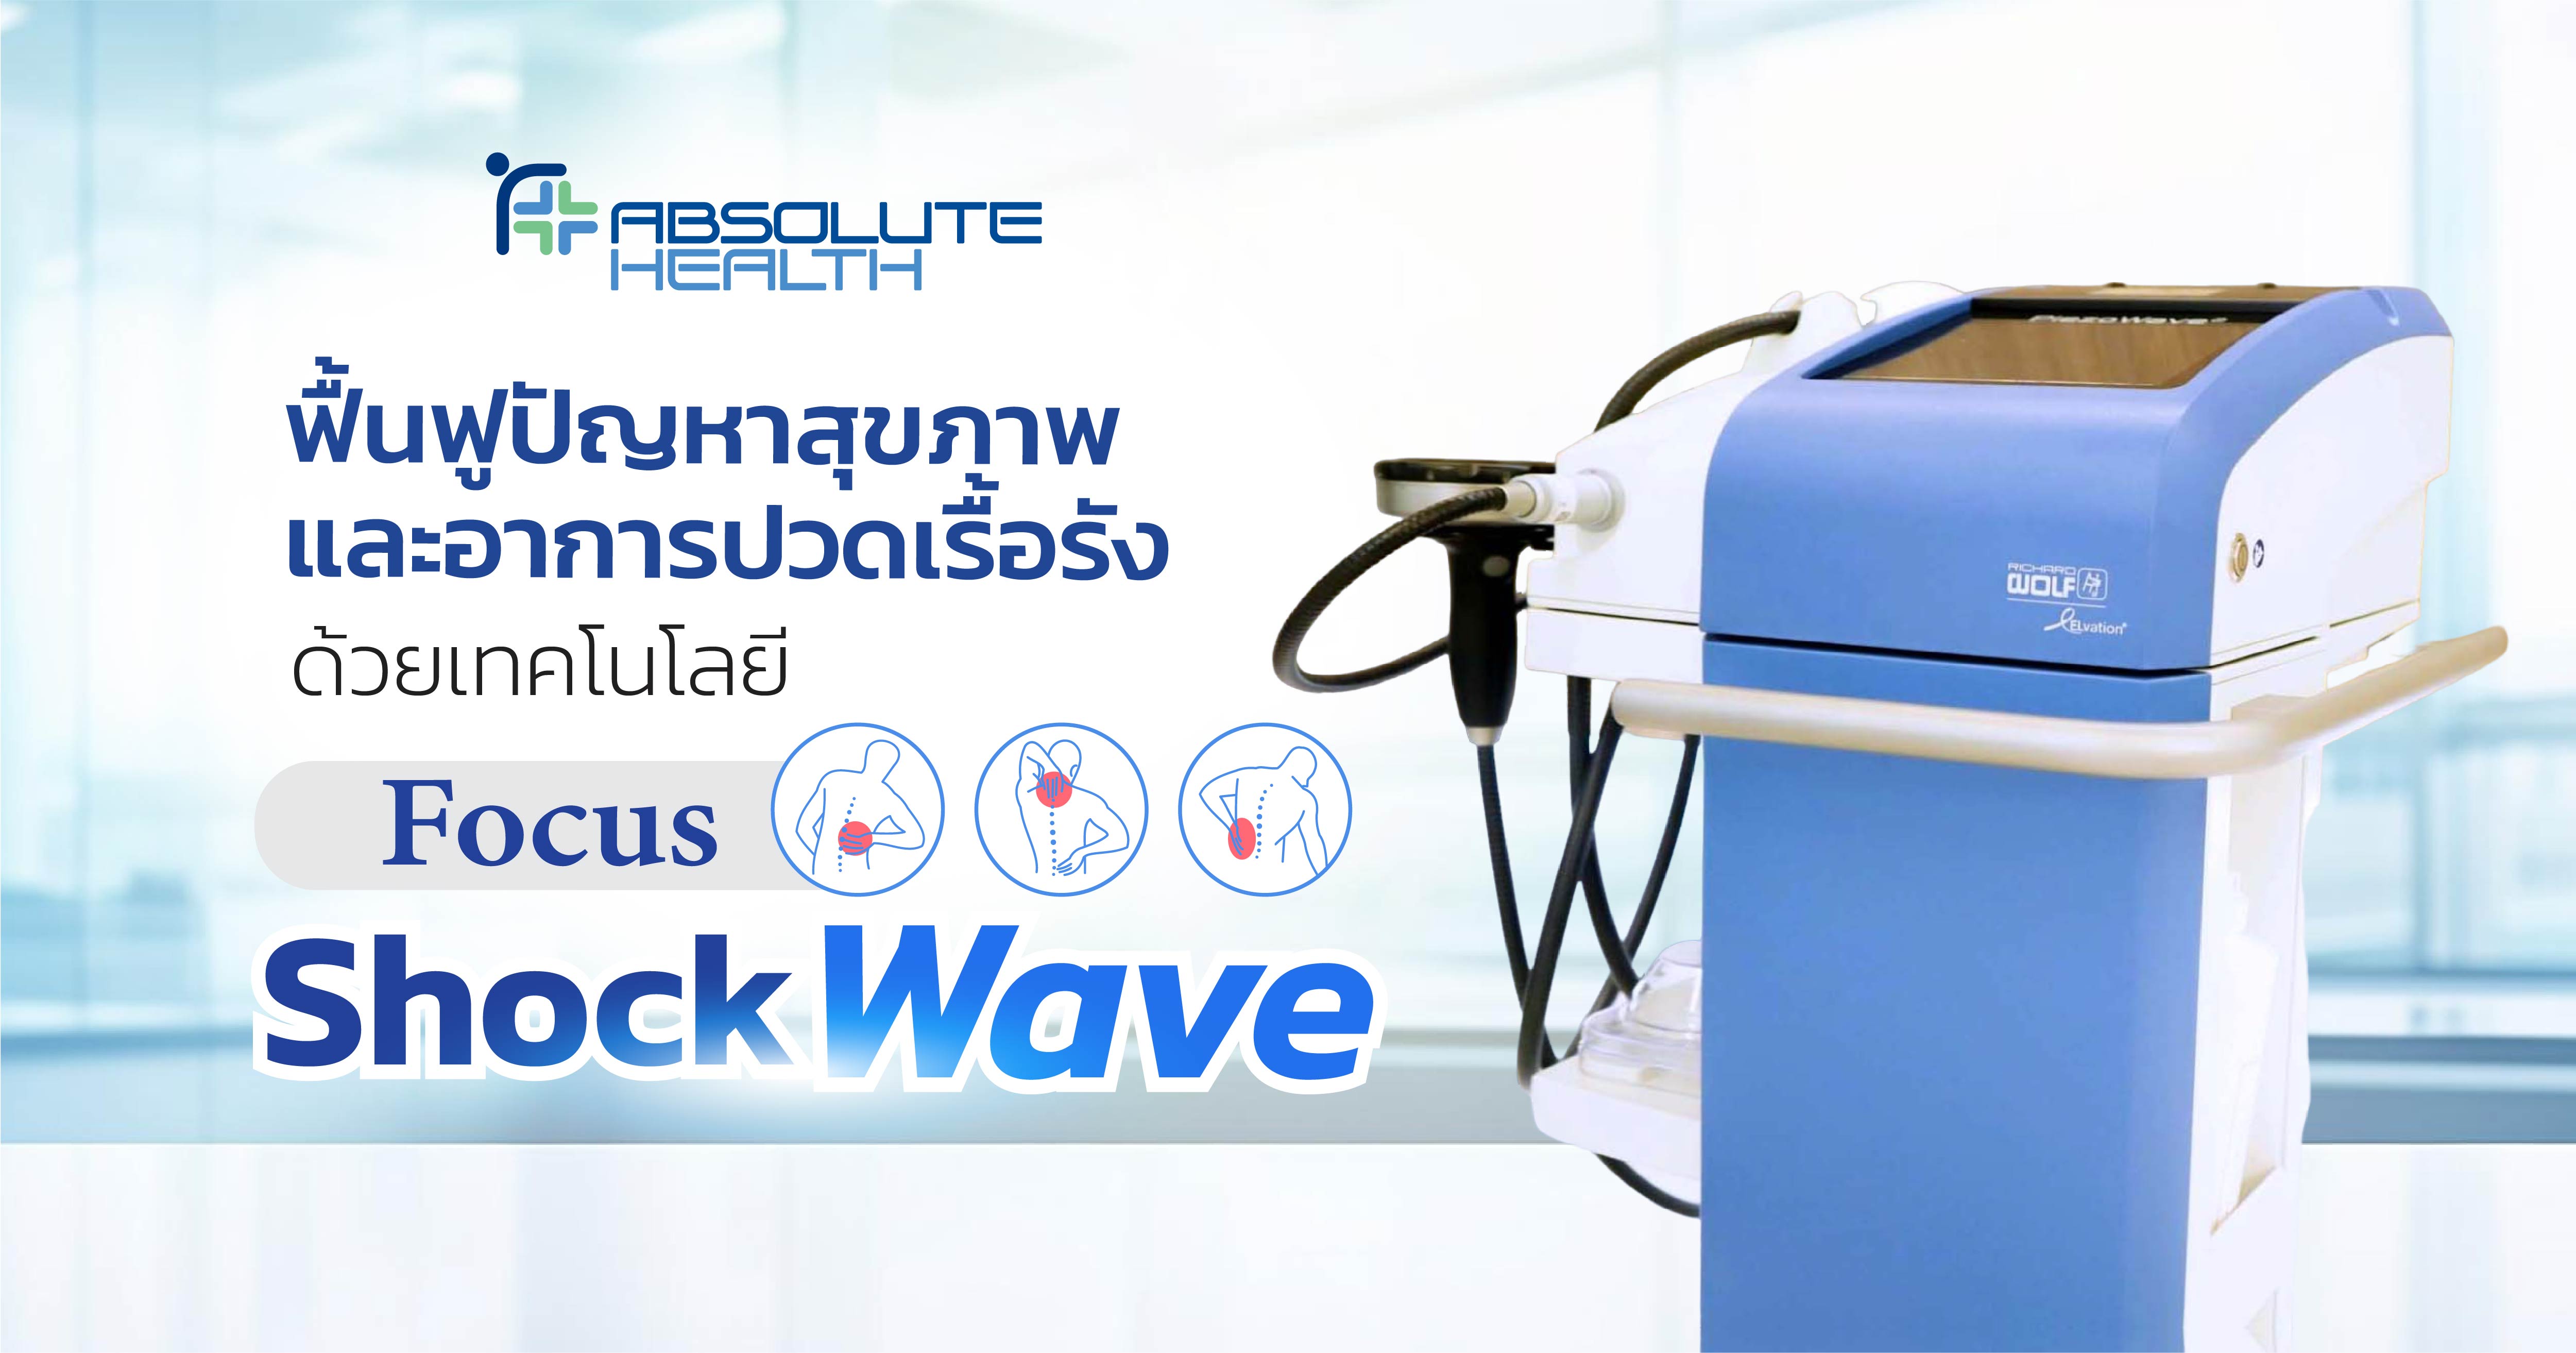 Restore Health Problems and Chronic Pain with Focus Shock Wave Technology